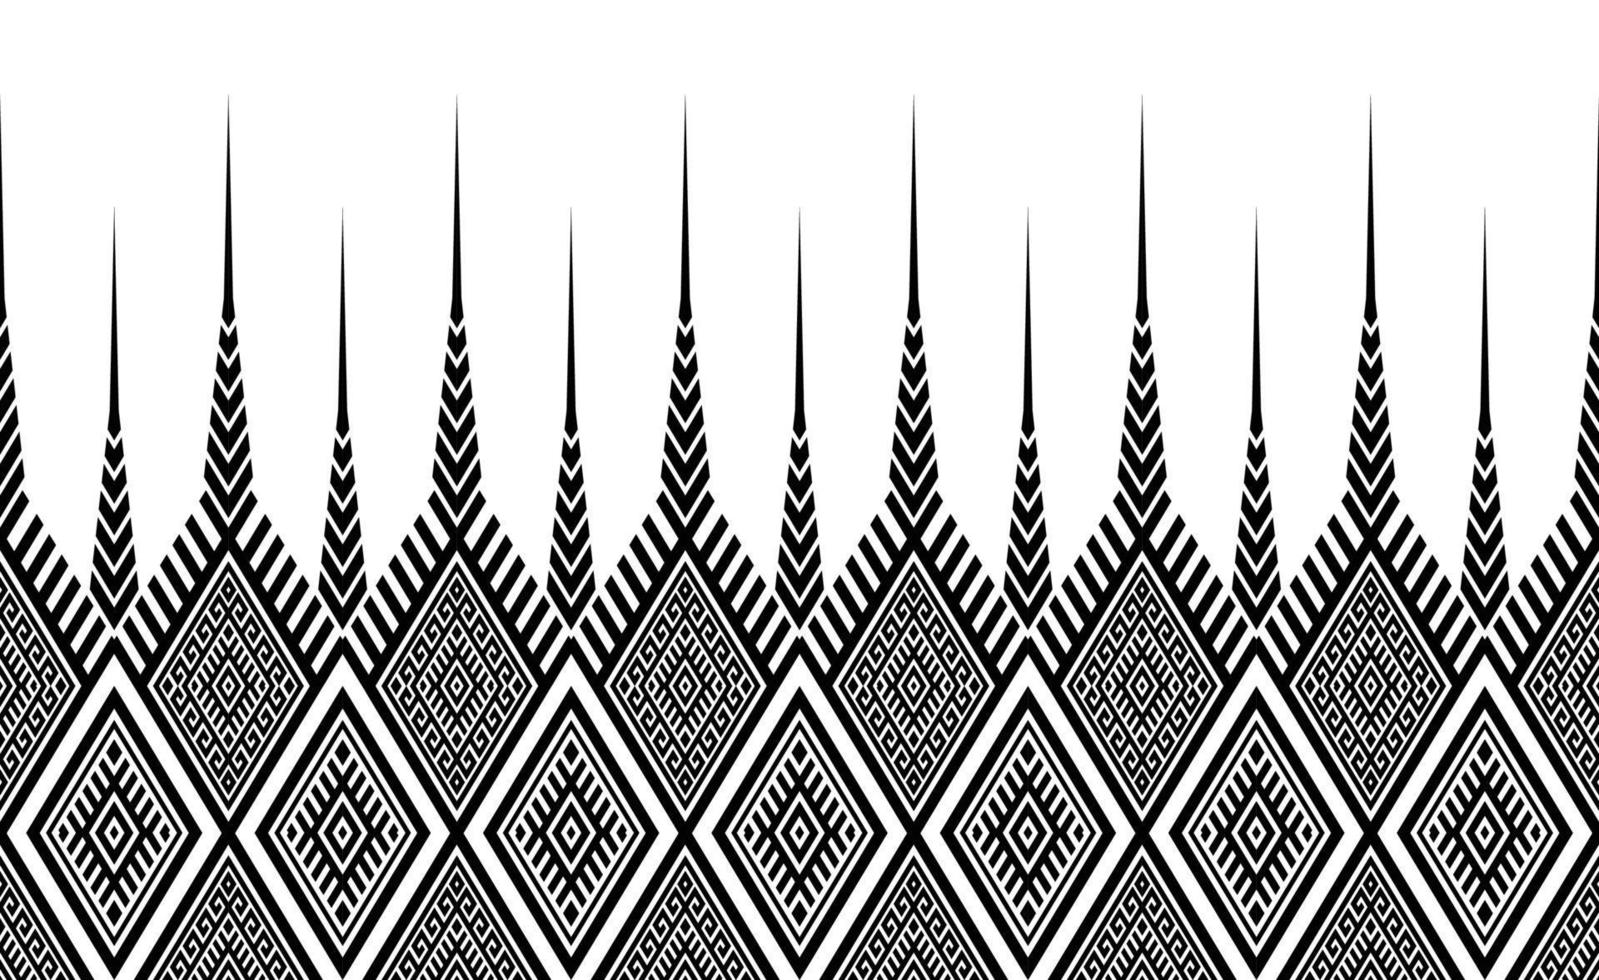 Pattern design with geometric shapes. vector